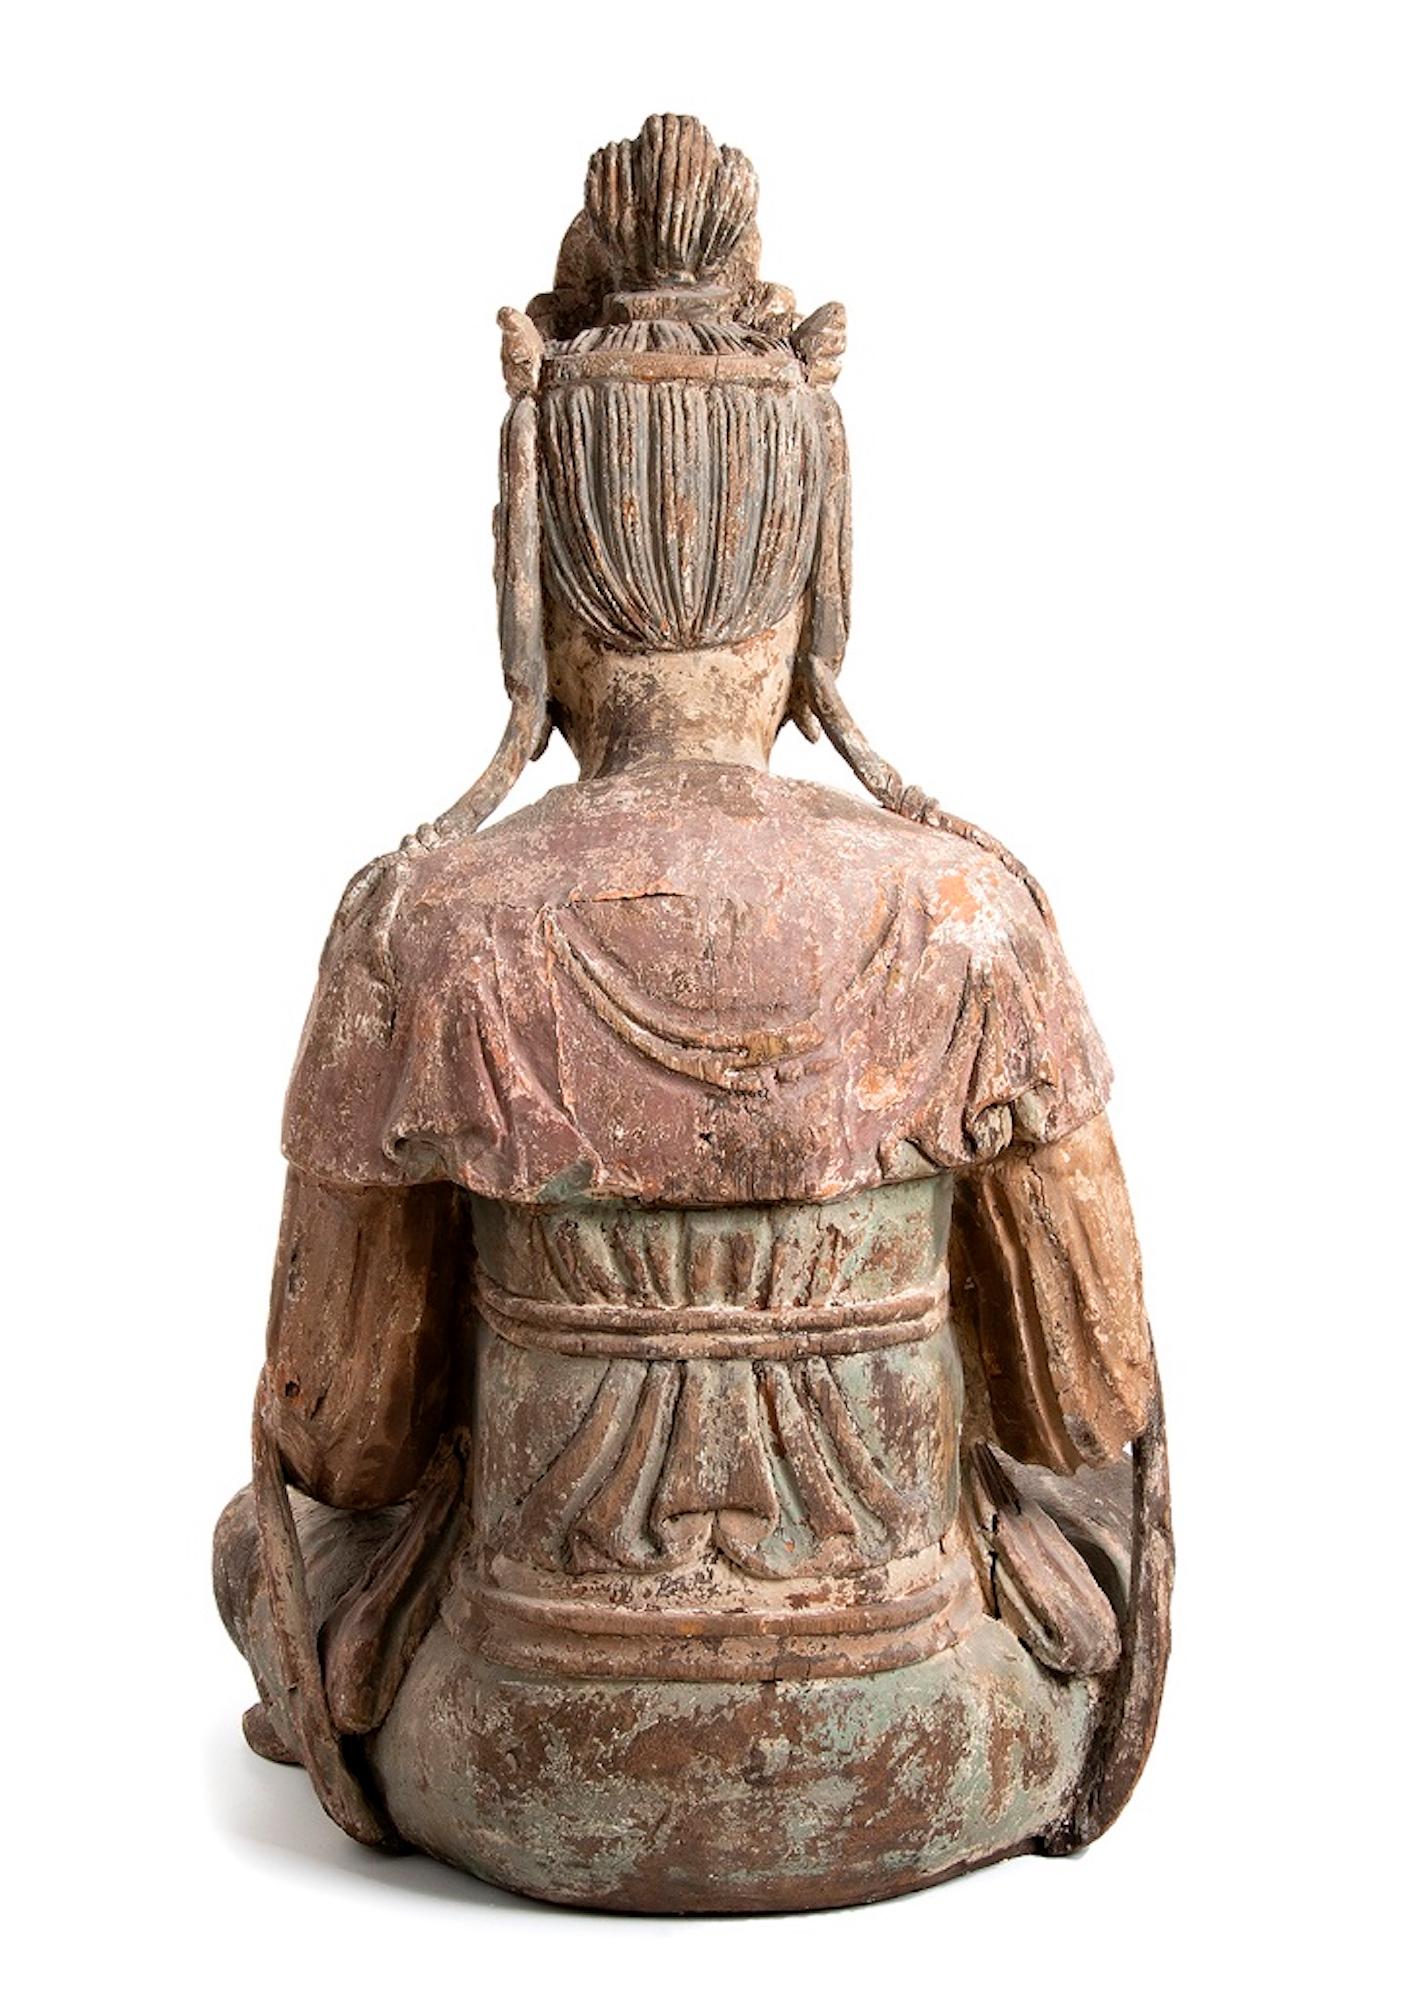 Guanyin, Qing Dynasty China is an original precious manufacture realized in China during the Qing Dynasty.

Handmade painted Chinese wood.

Provenance: Private collection. 

Good conditions. 

Bodhisattva Guanyin (Avalokitesvara) is one of